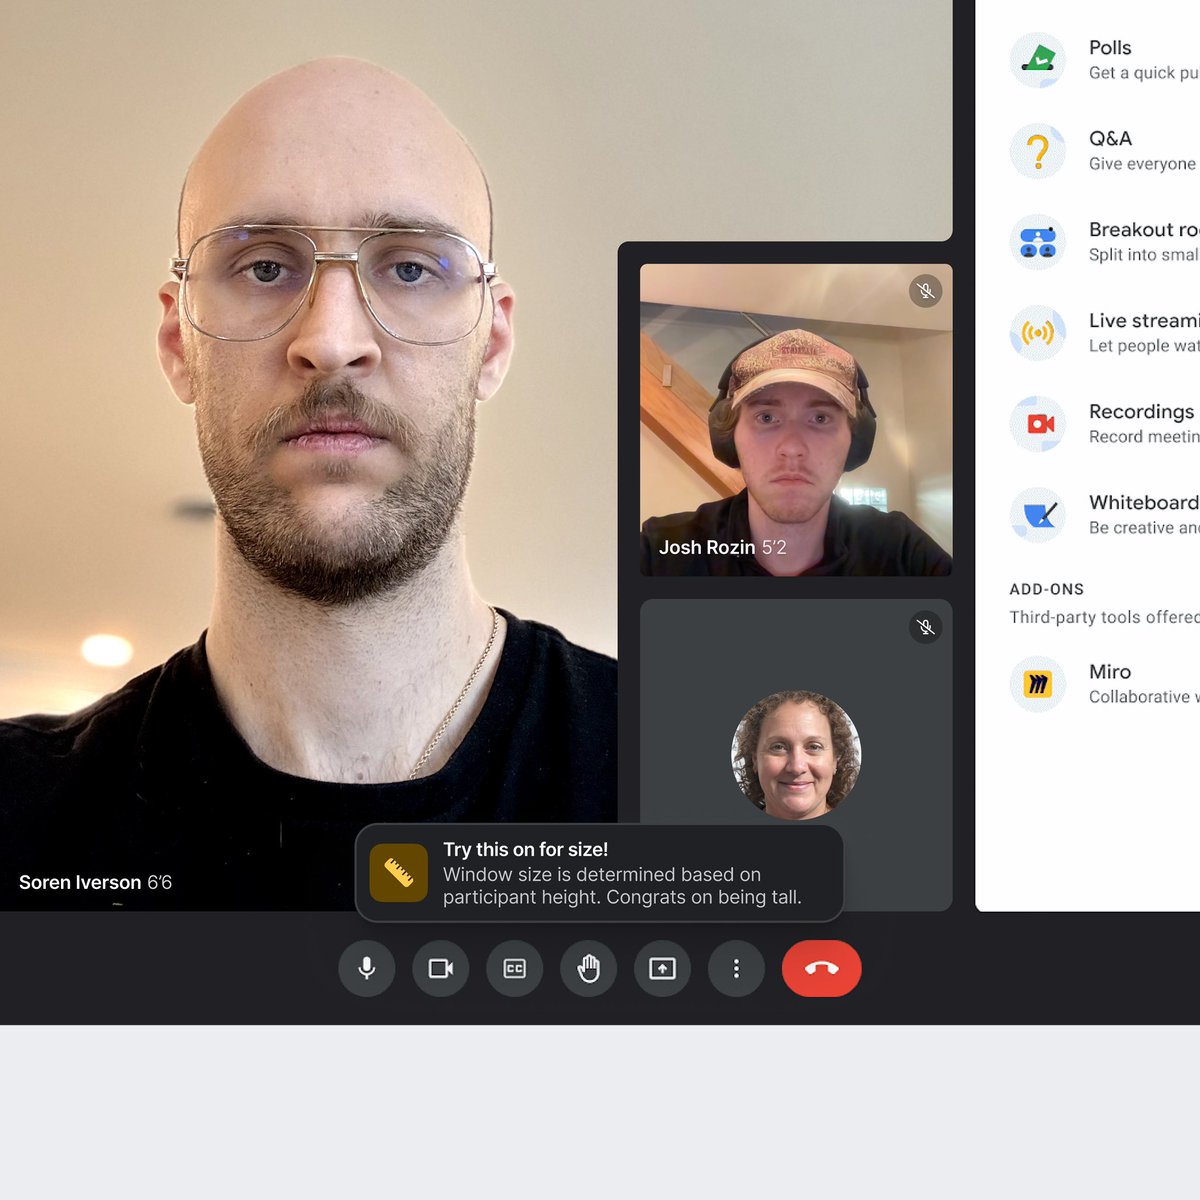 Google Meet scale video size based on height